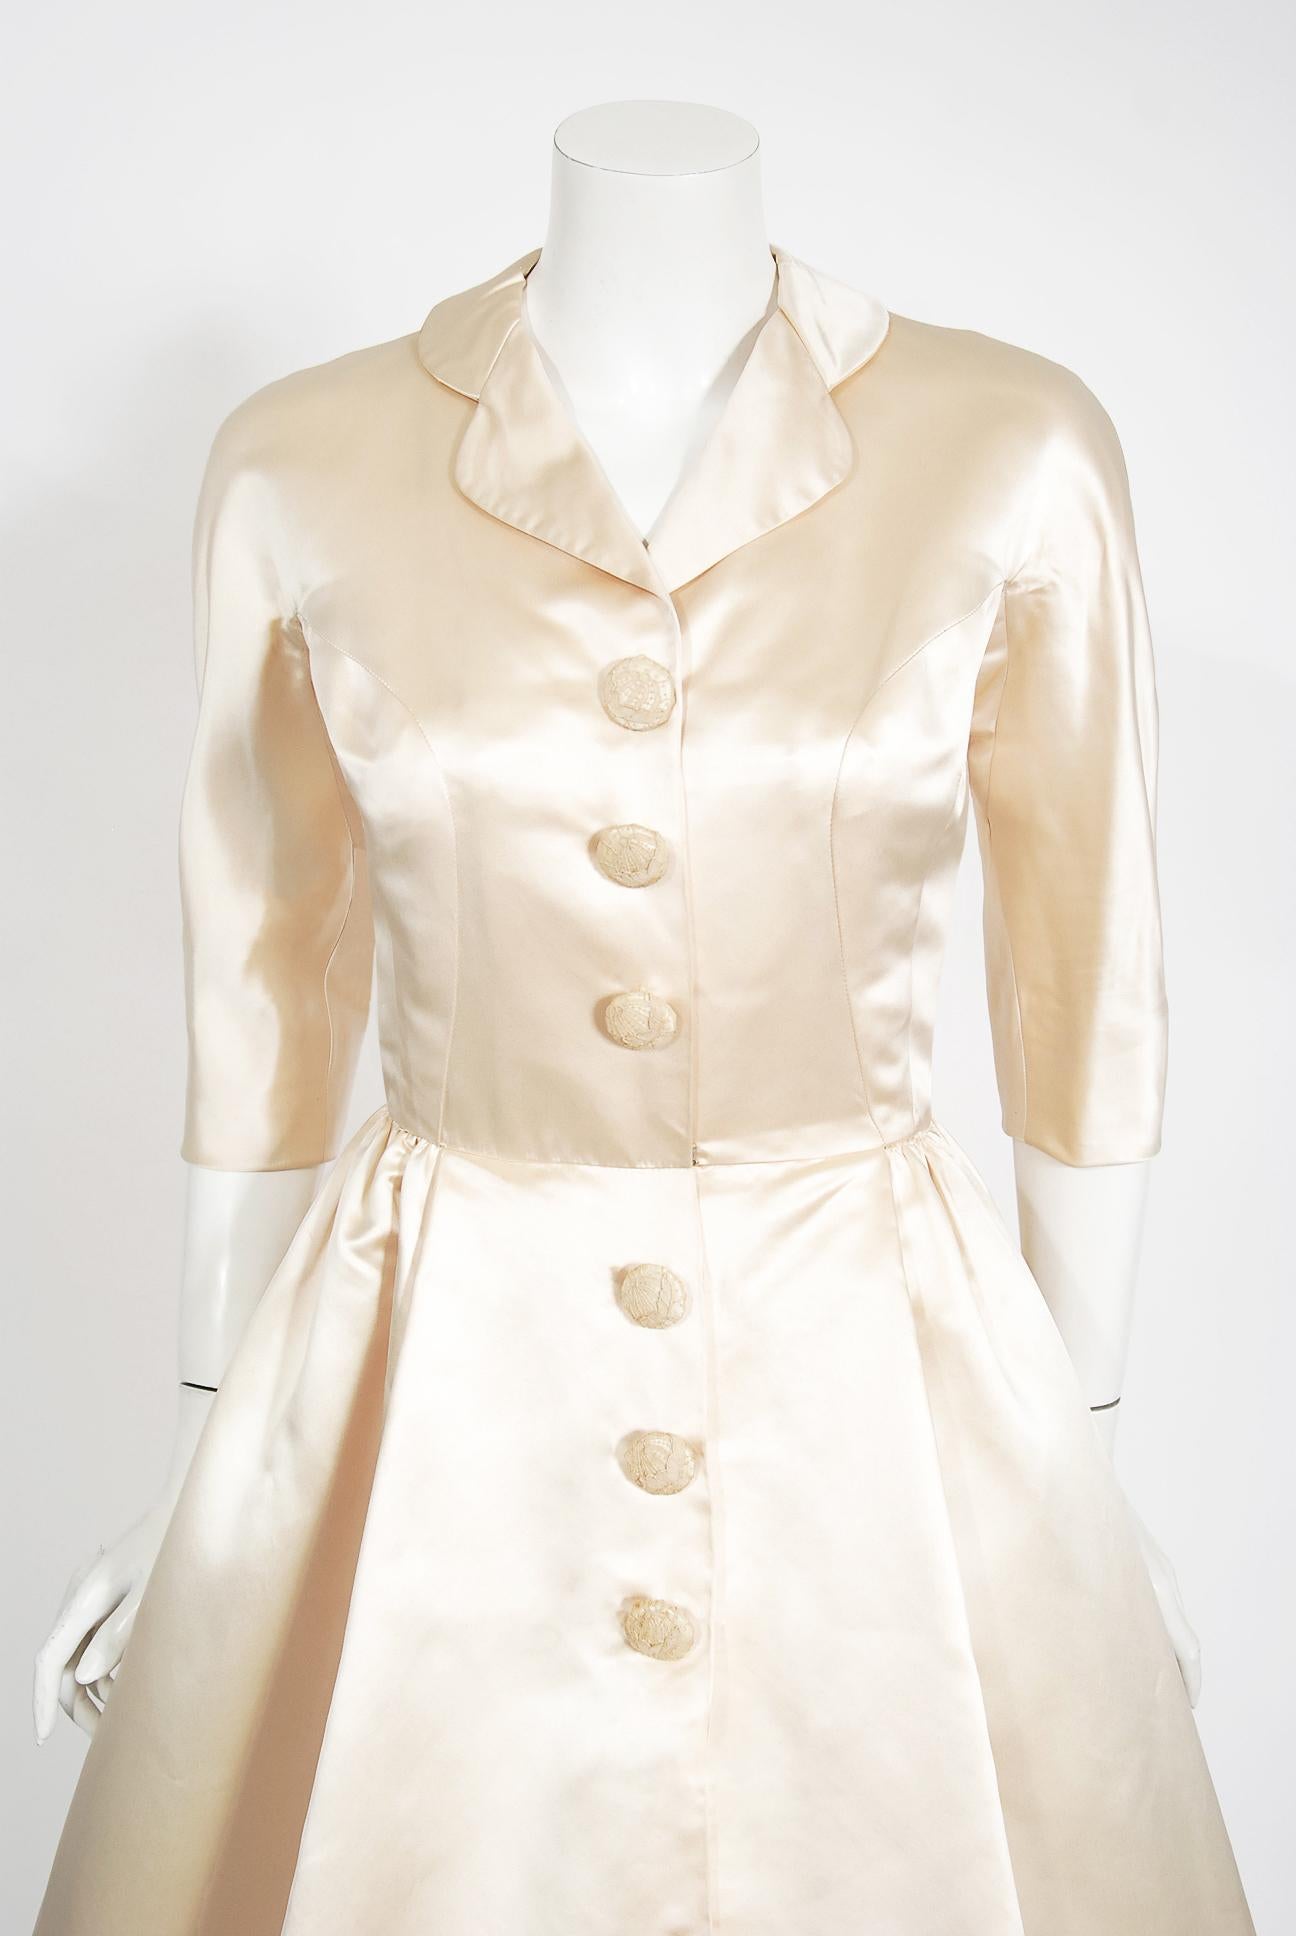 An incredibly chic and totally timeless Traina Norell designer ivory silk satin full-skirted cocktail dress dating back to the mid 1950's. This exquisite Traina-Norell museum quality dress exemplifies their signature blend of couture-level quality